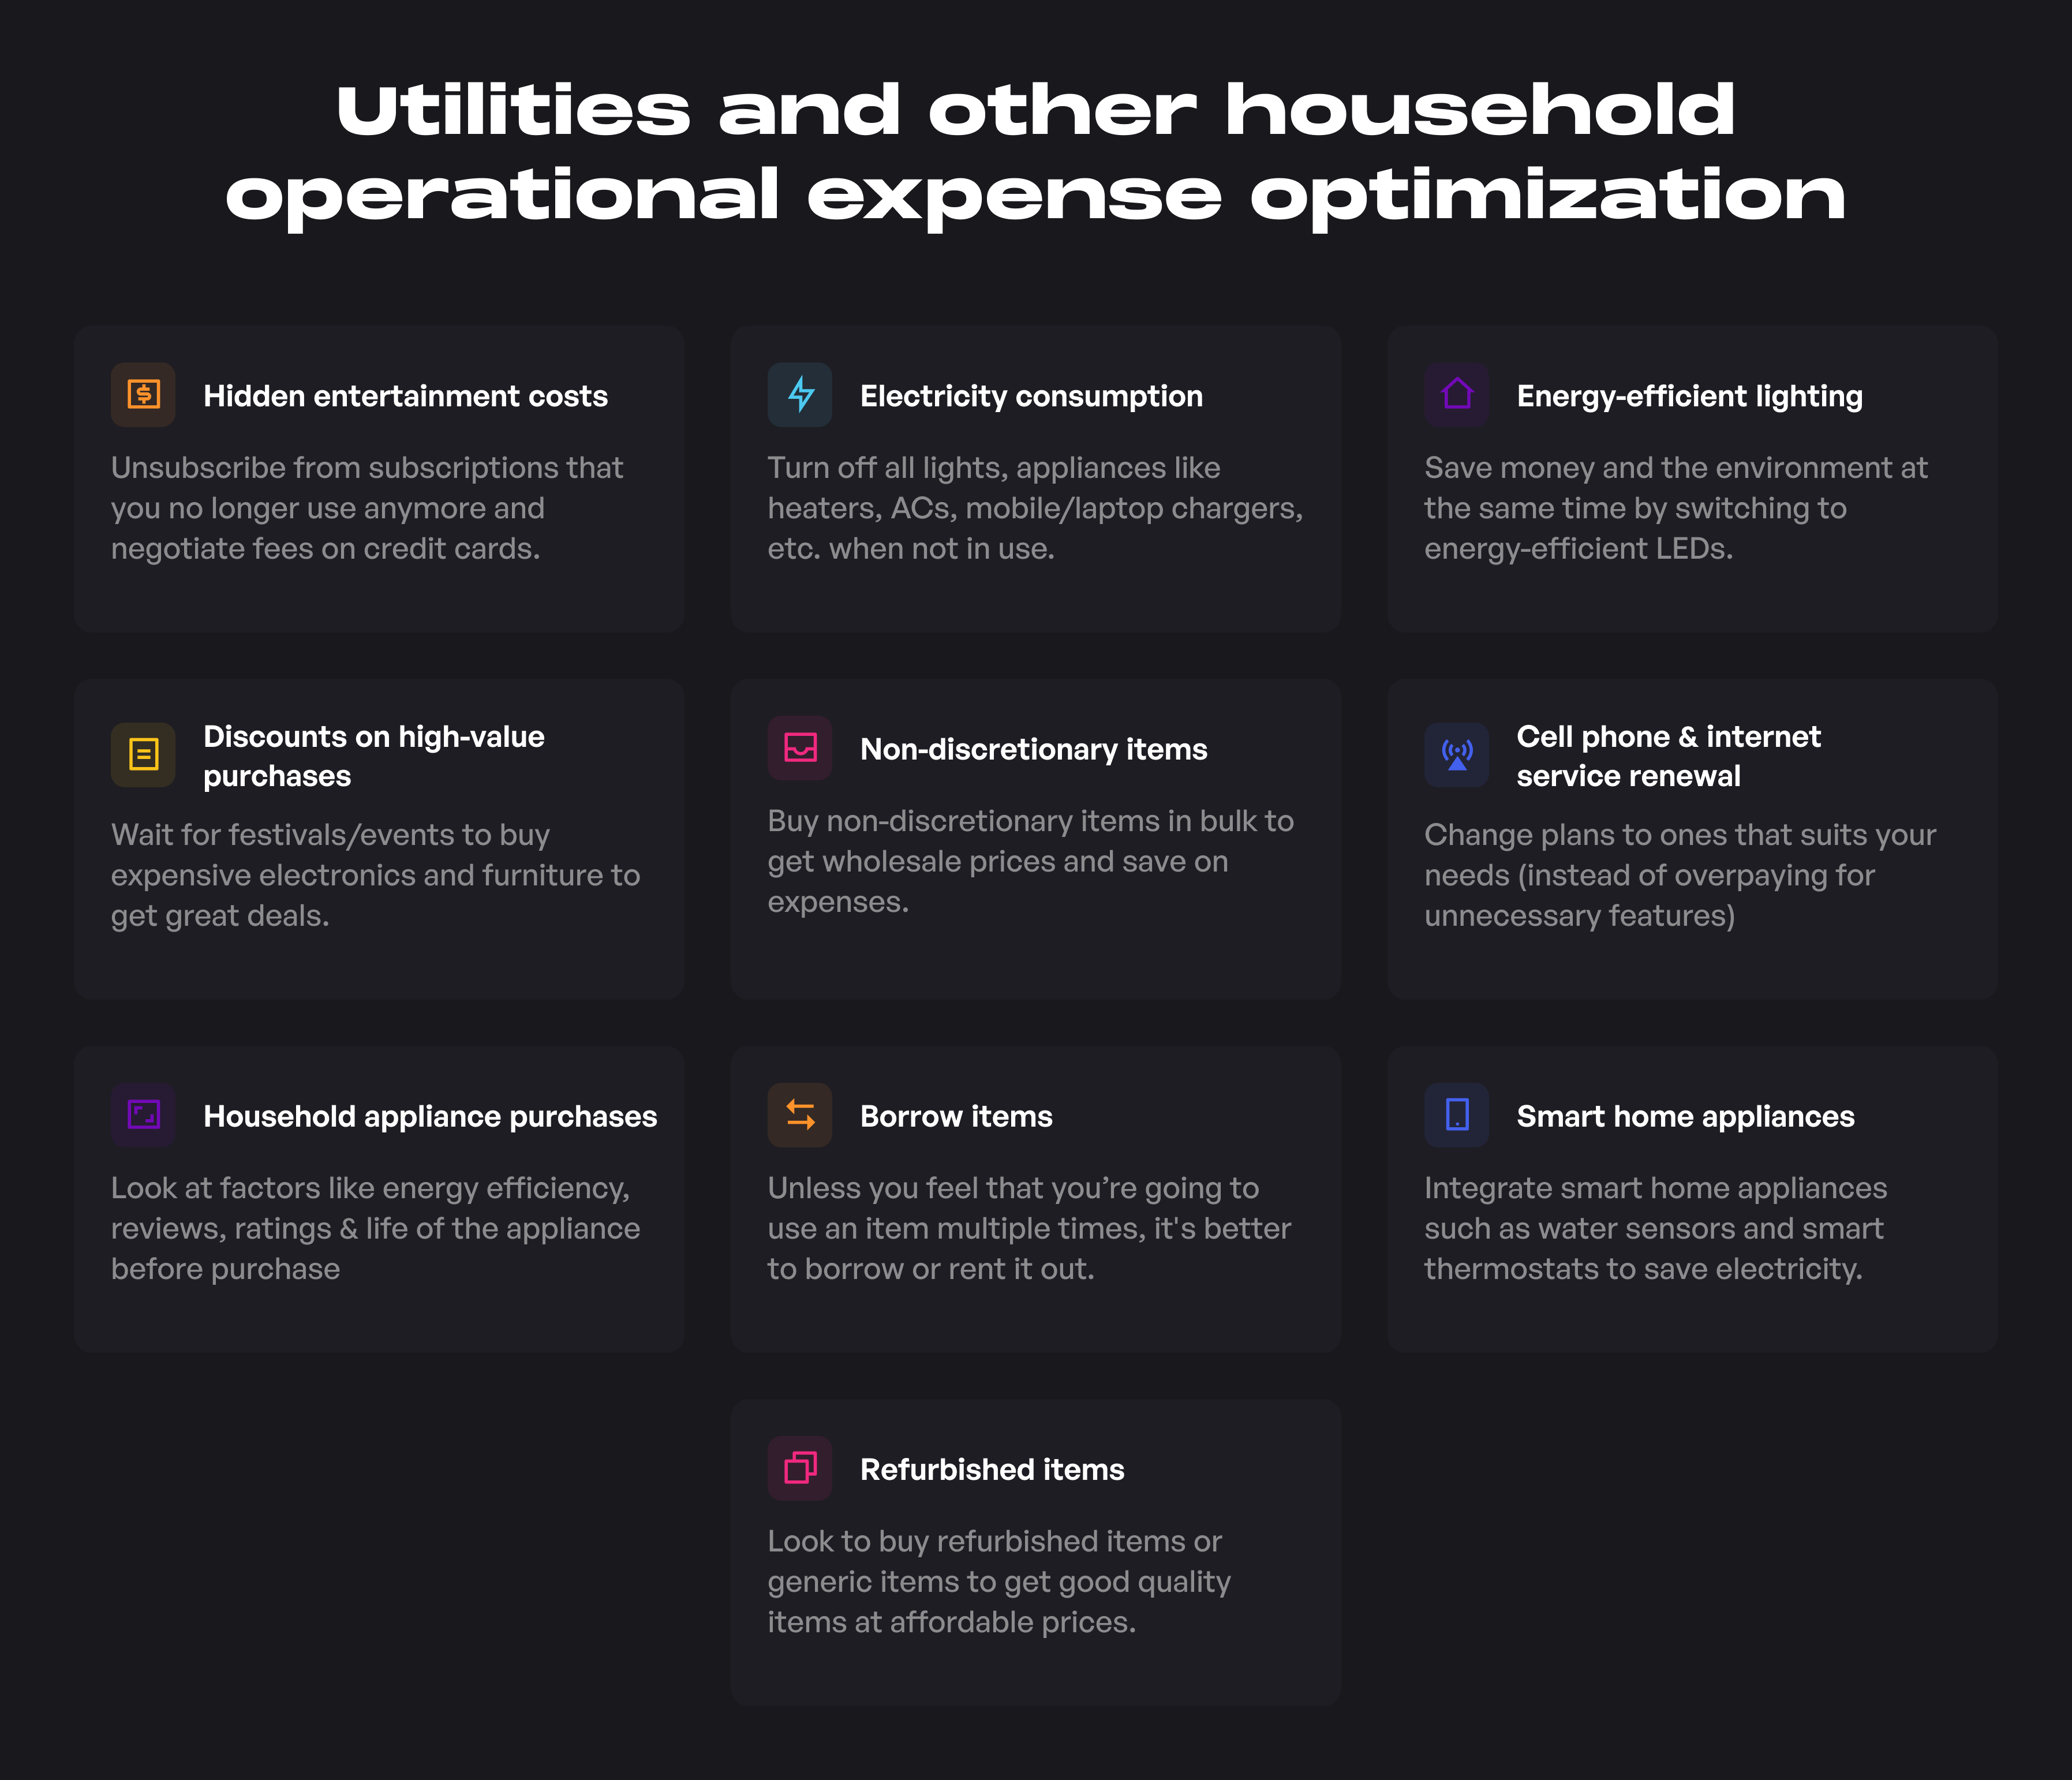 Utilities and other household operati...